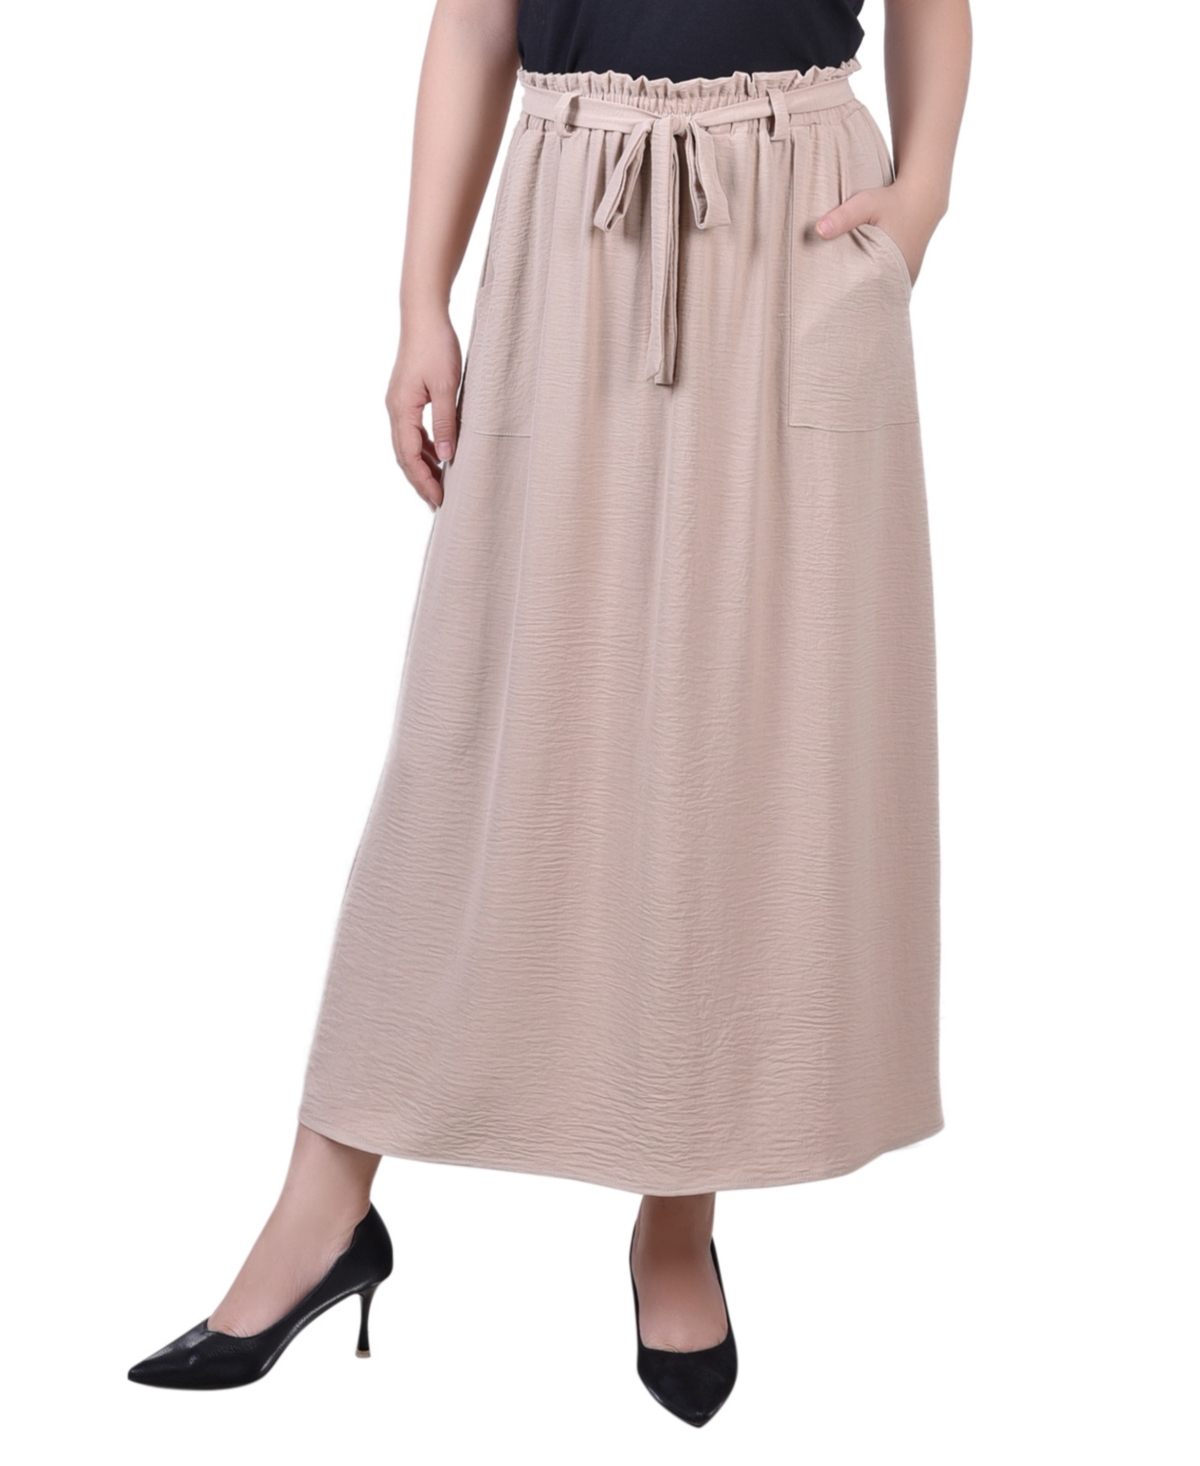 NY COLLECTION WOMEN'S ANKLE LENGTH BELTED A-LINE SKIRT